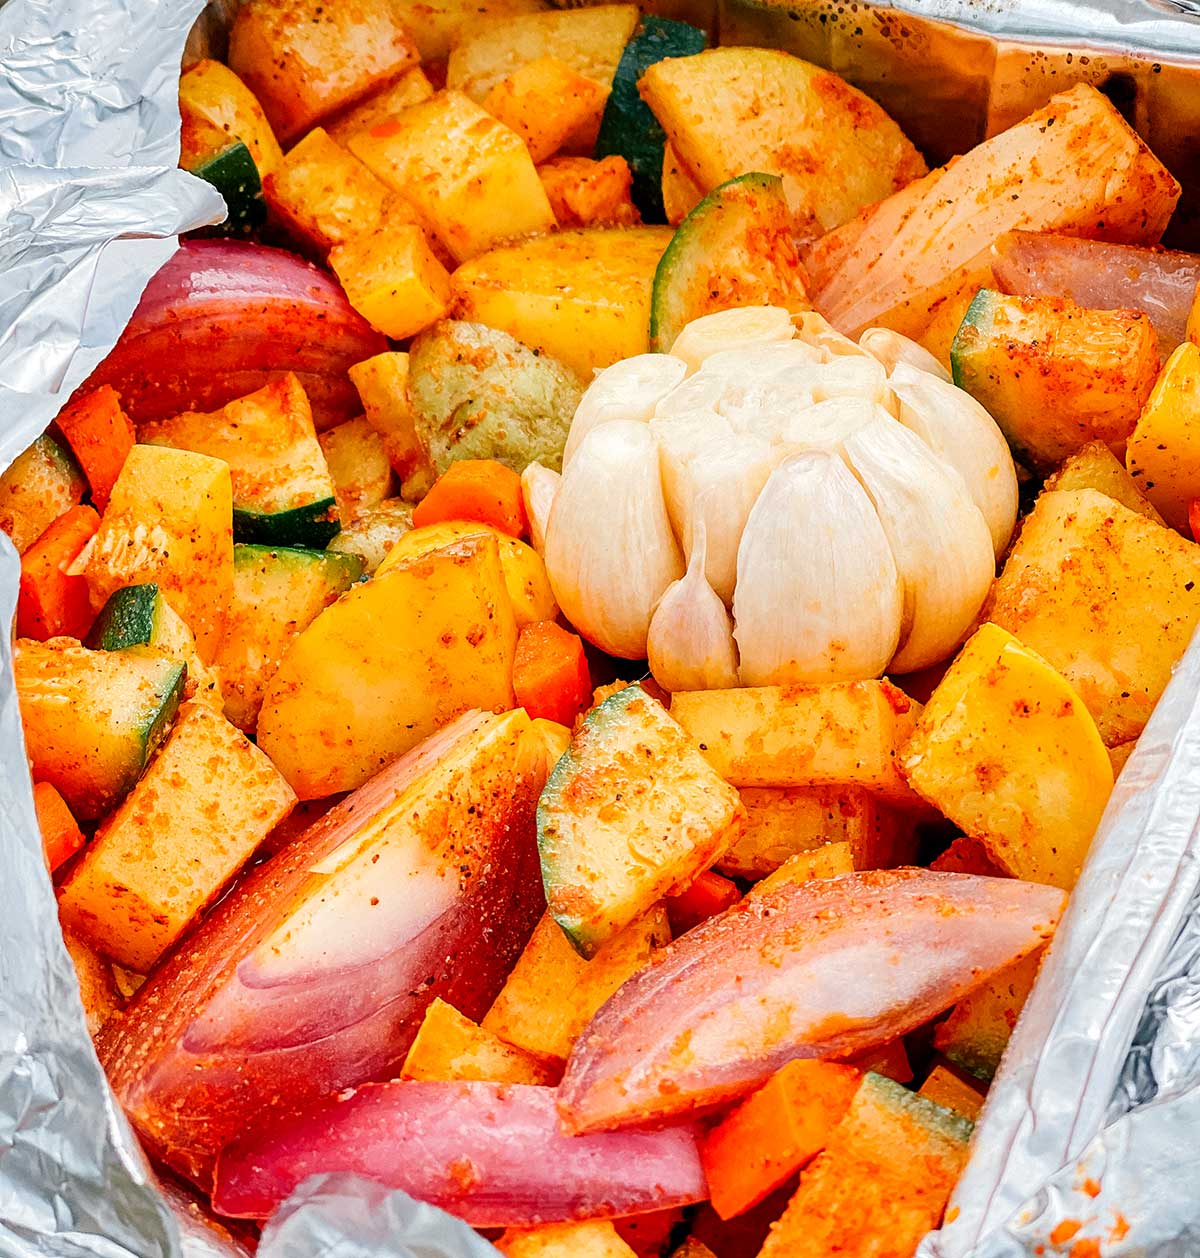 An up close look detailing the texture and seasonings of campfire roasted vegetables